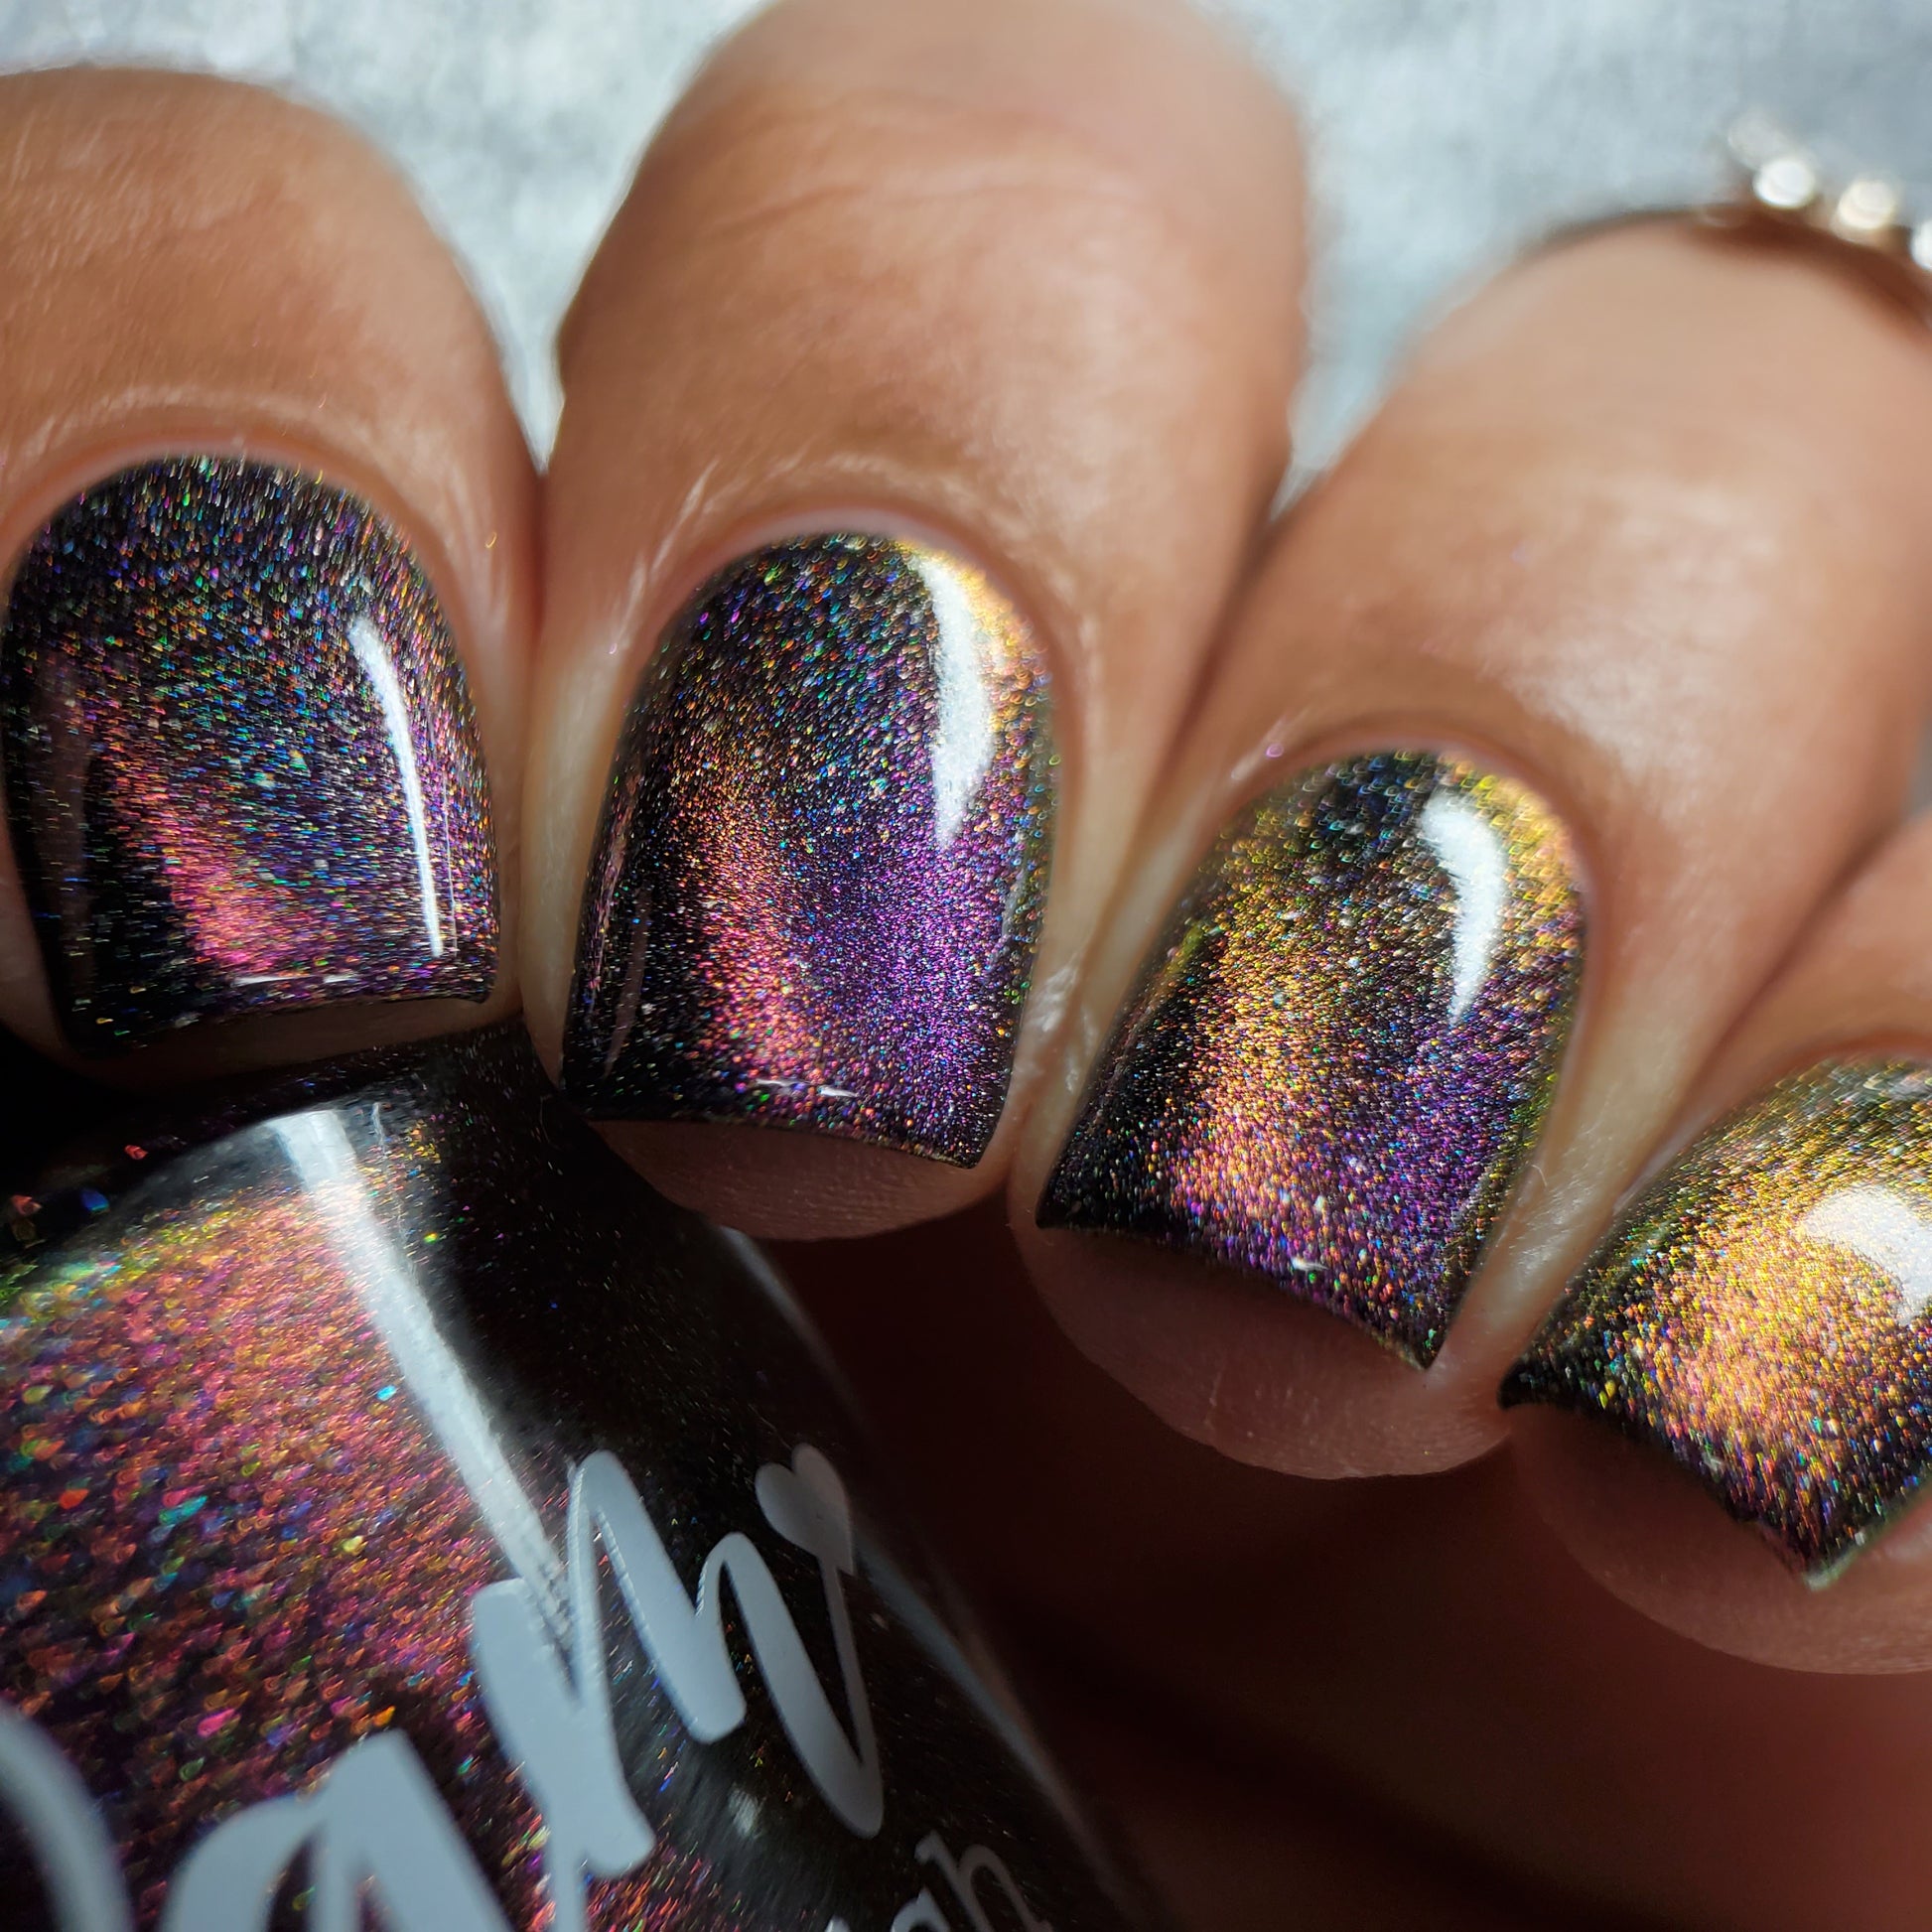 Pulsar - Pink/Bronze/Green Magnetic Holographic Nail Polish - Astronomical 2 Collection - Dam